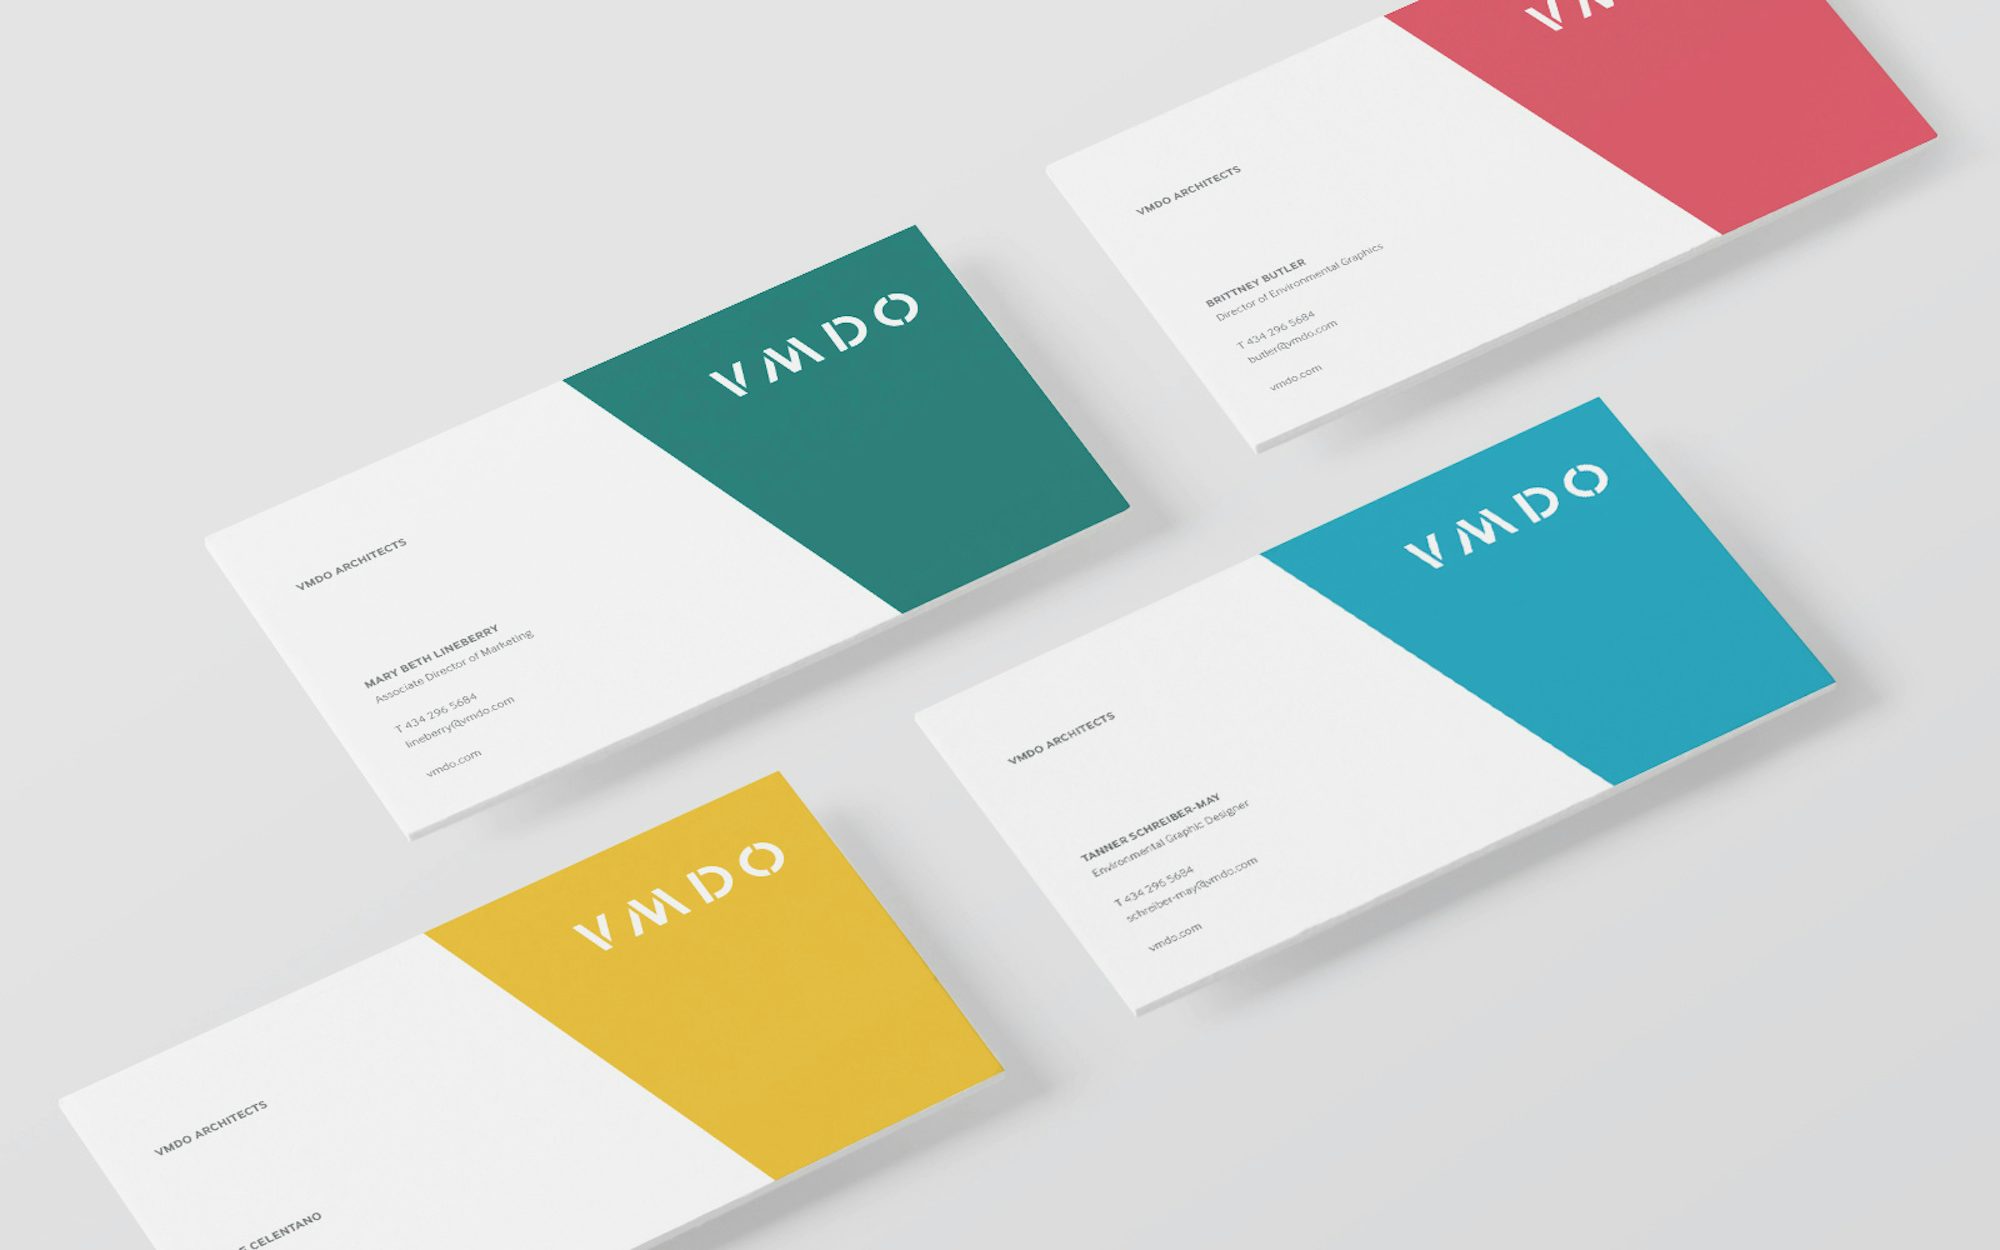 Best Architecture Firm Branding and Design